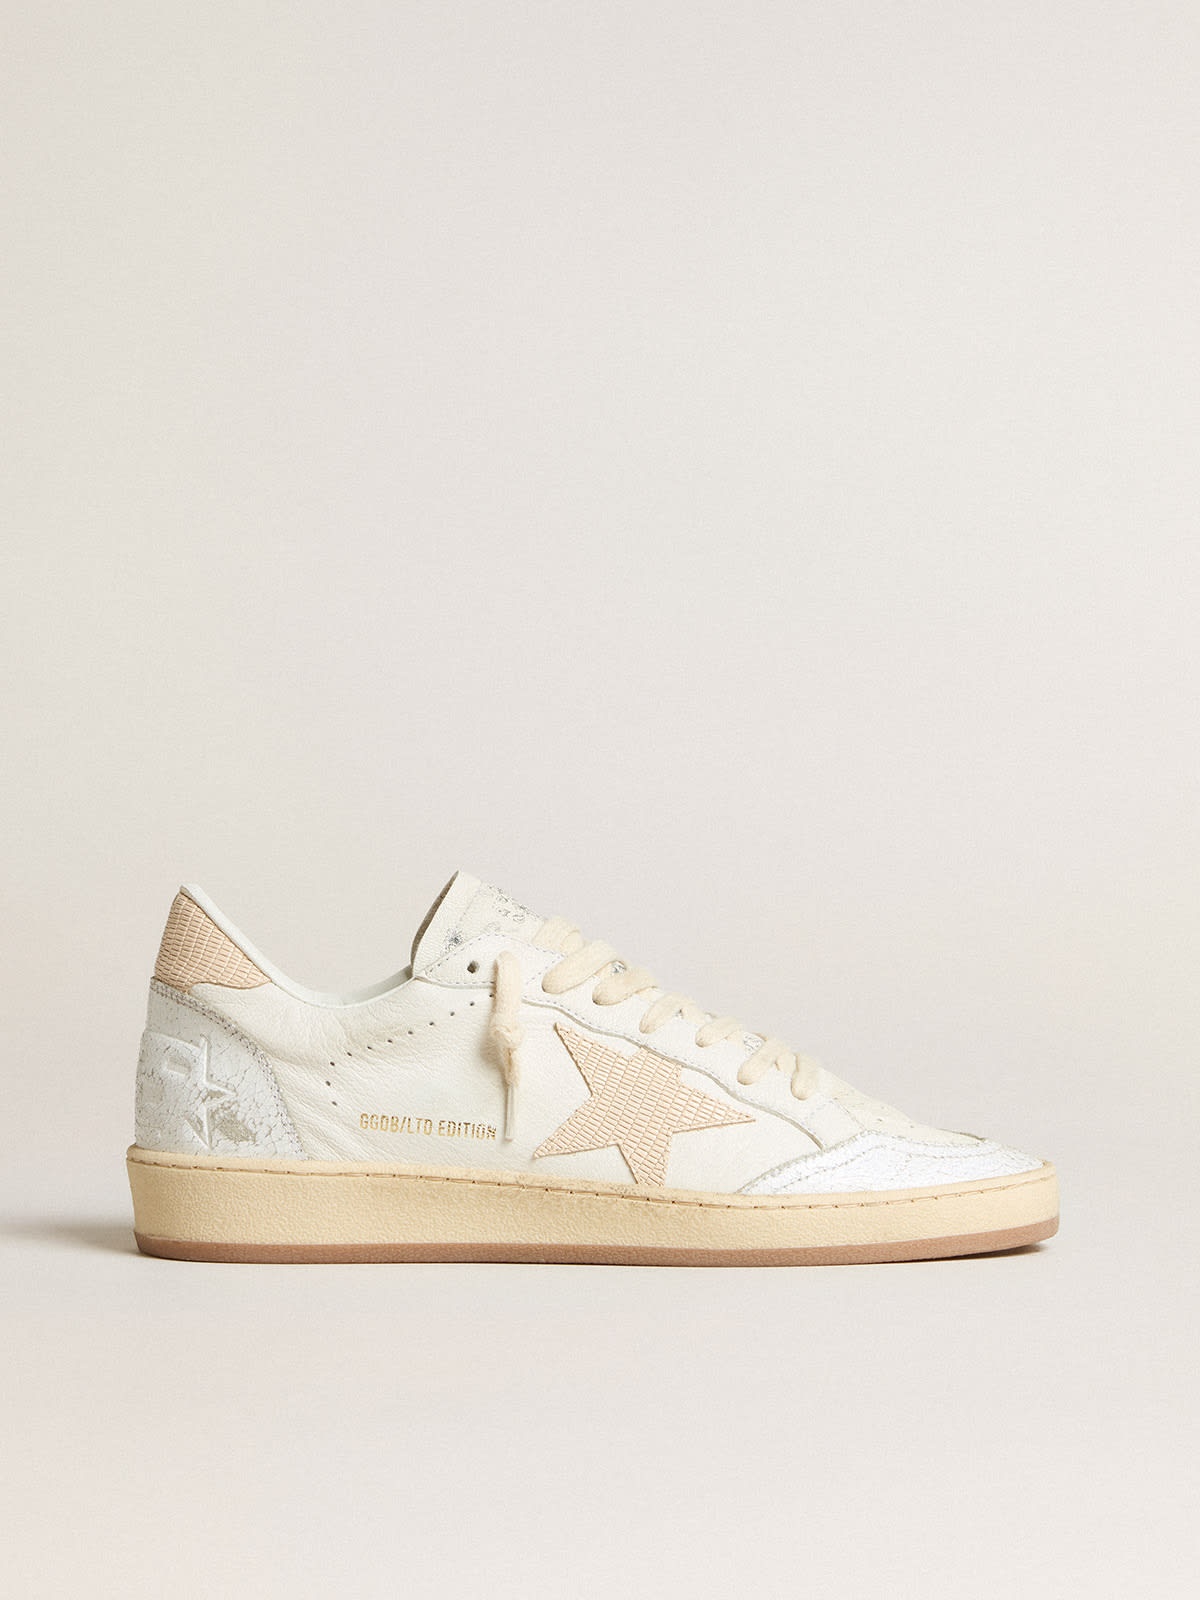 Women’s Ball Star LTD CNY in white leather with ivory star - 1